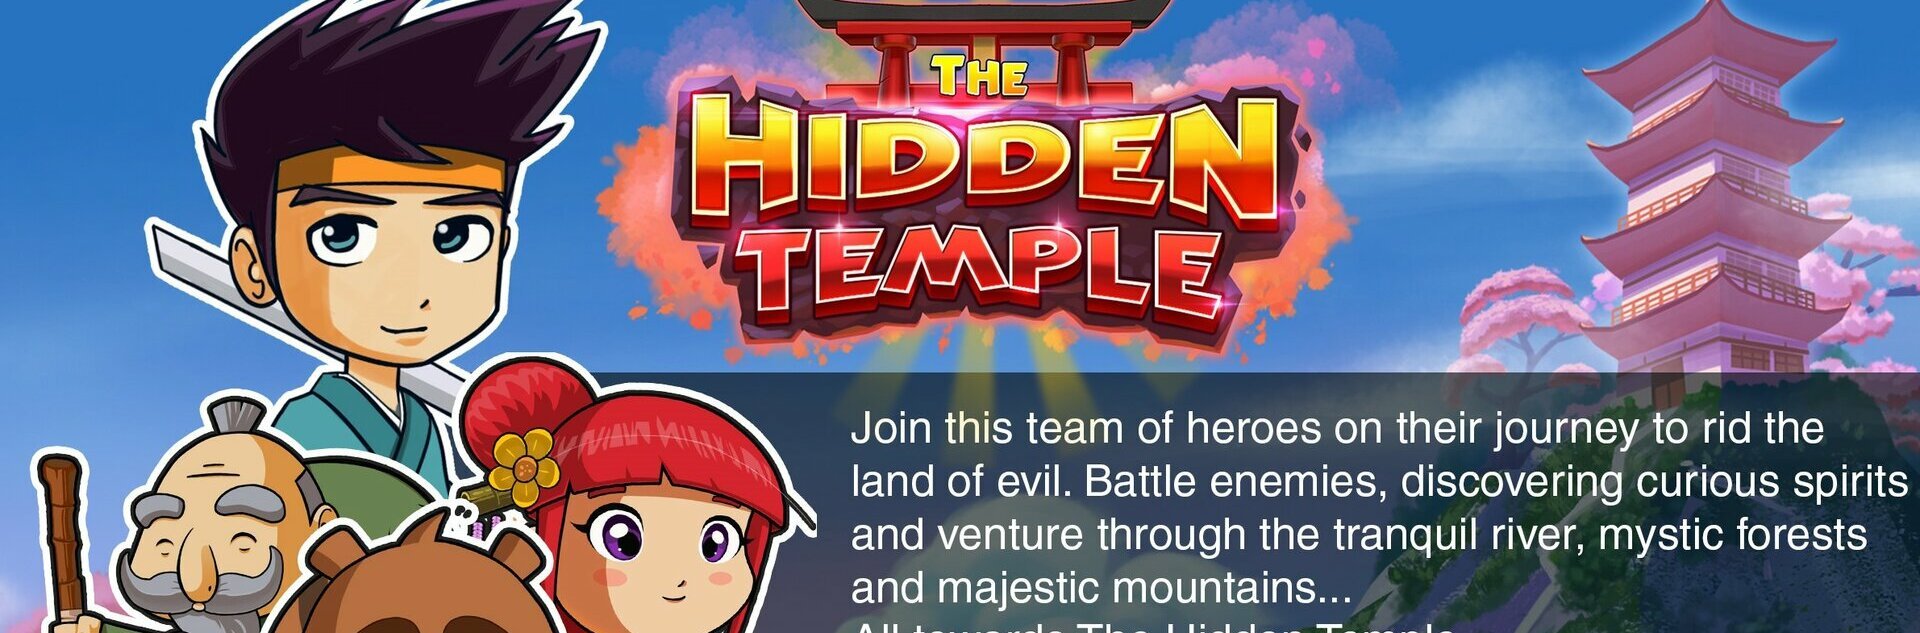 The Hidden Temple Free Spins